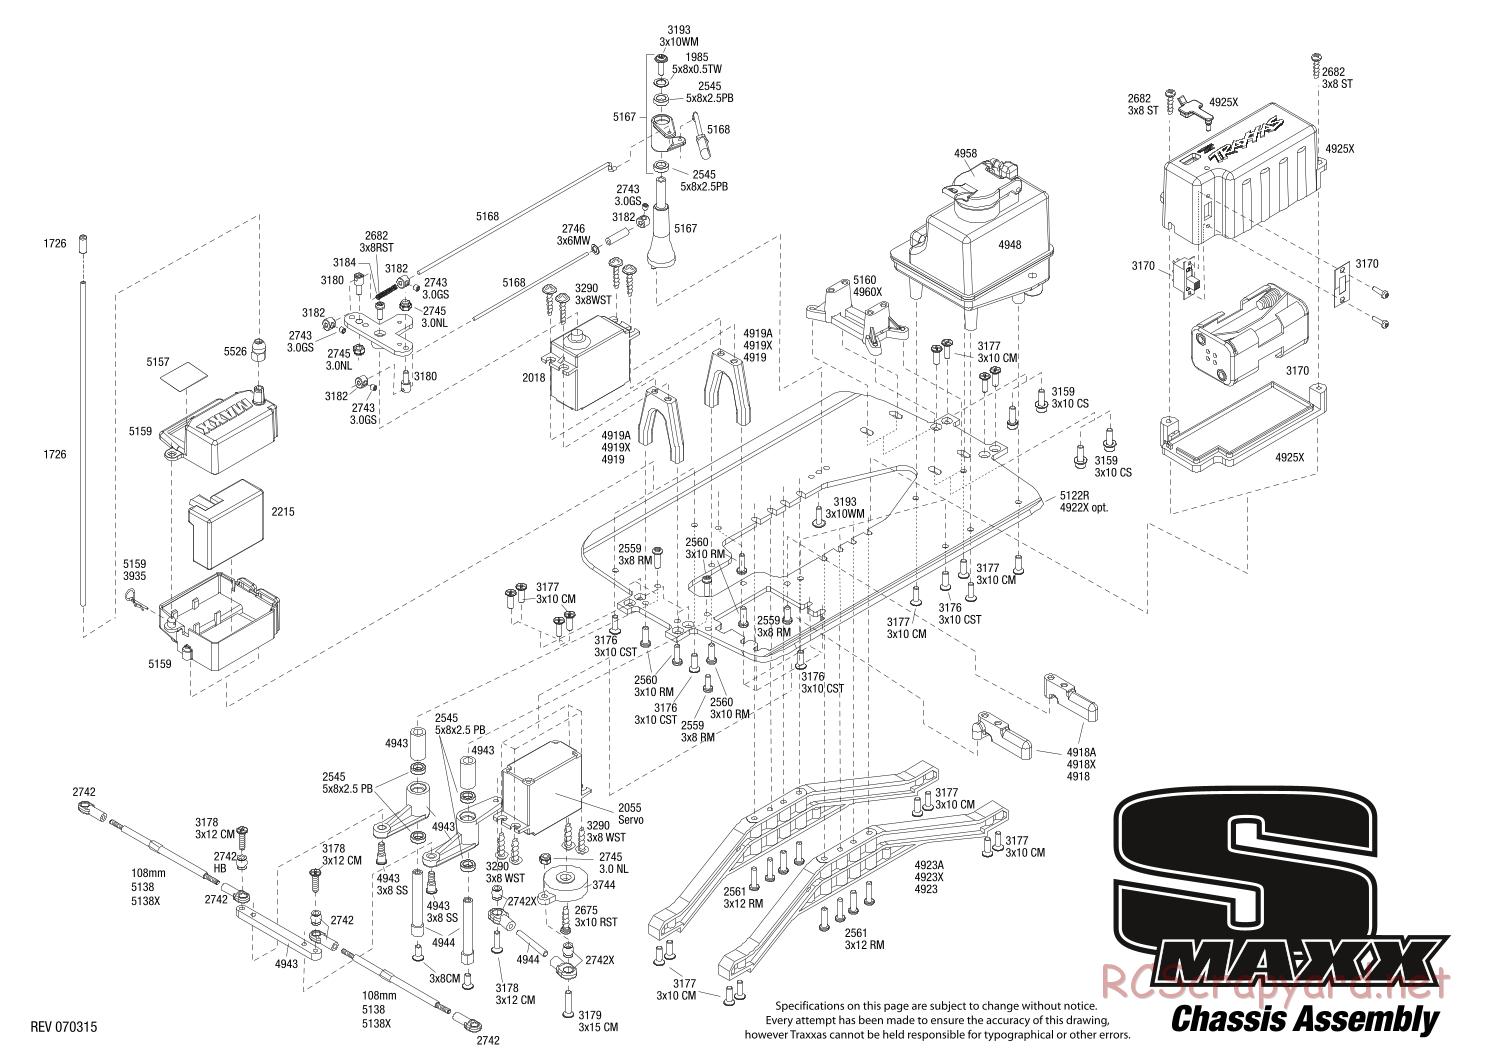 Traxxas - S-Maxx 2.5 (2004) - Exploded Views - Page 1